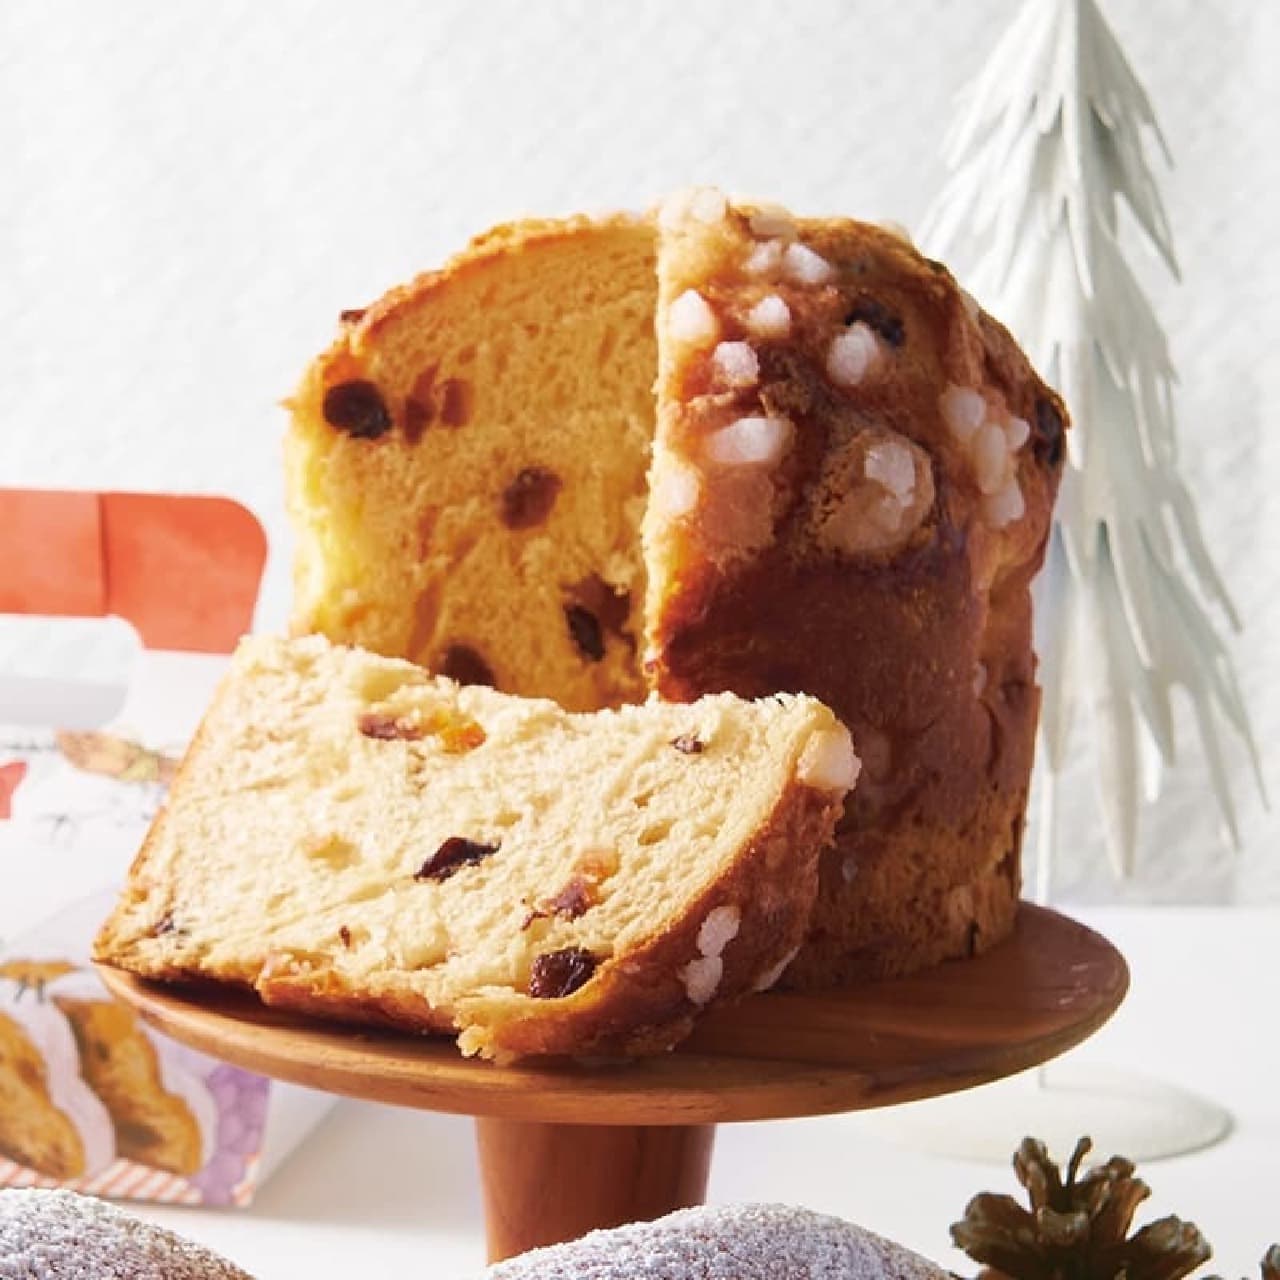 Chateraise "Xmas Panettone